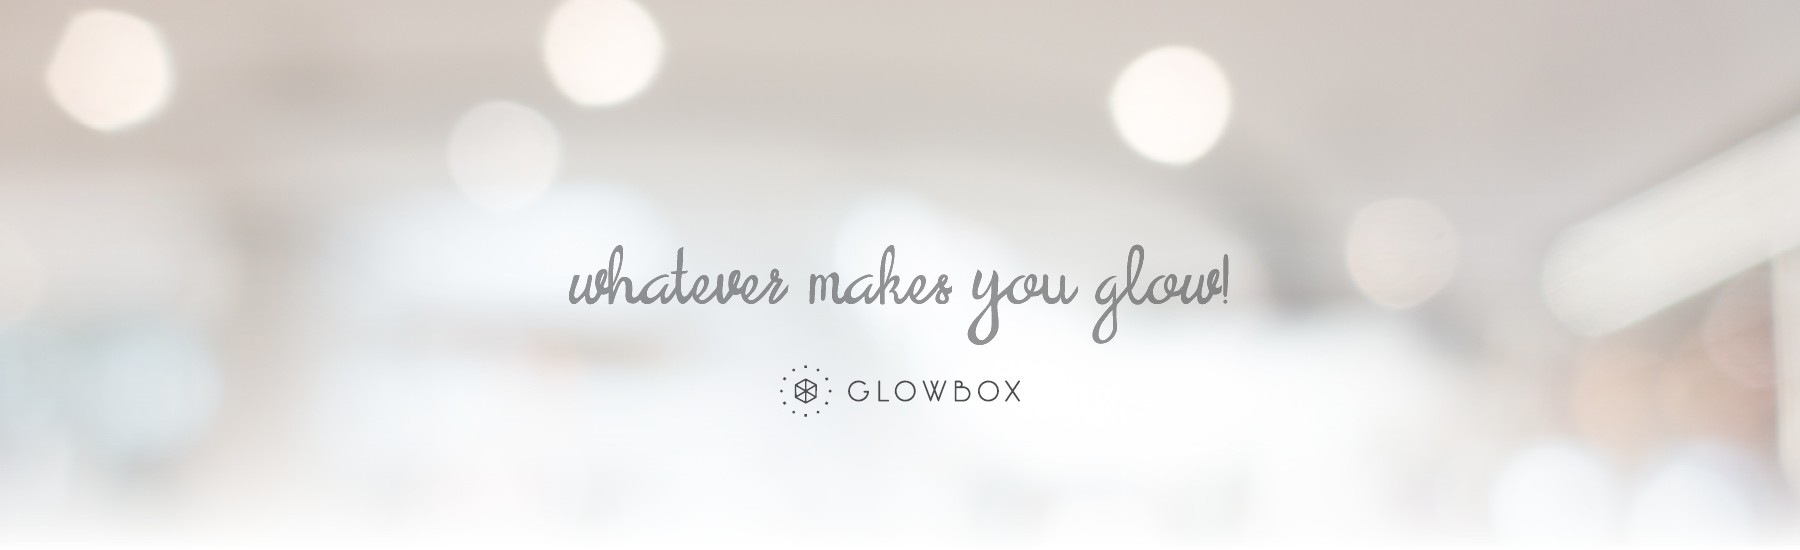 Whatever makes you glow!